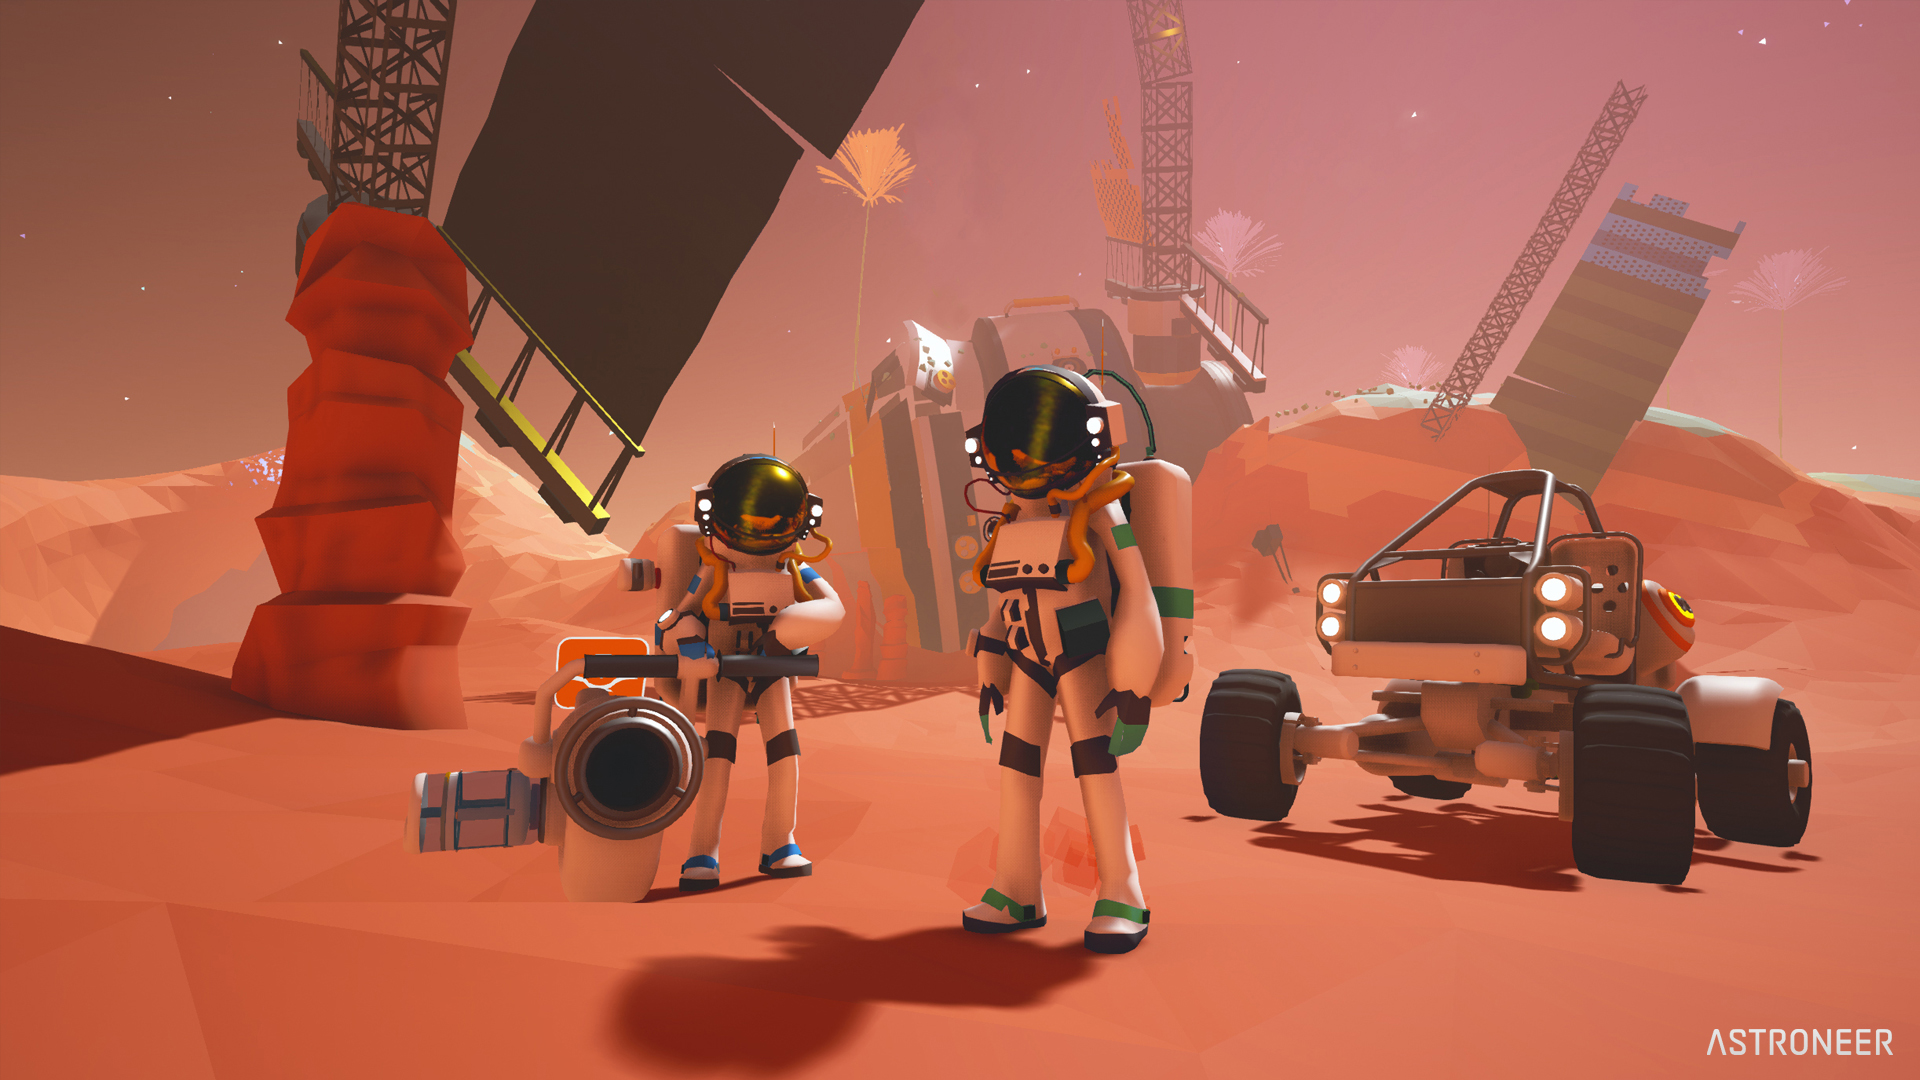 Video Game ASTRONEER 1920x1080